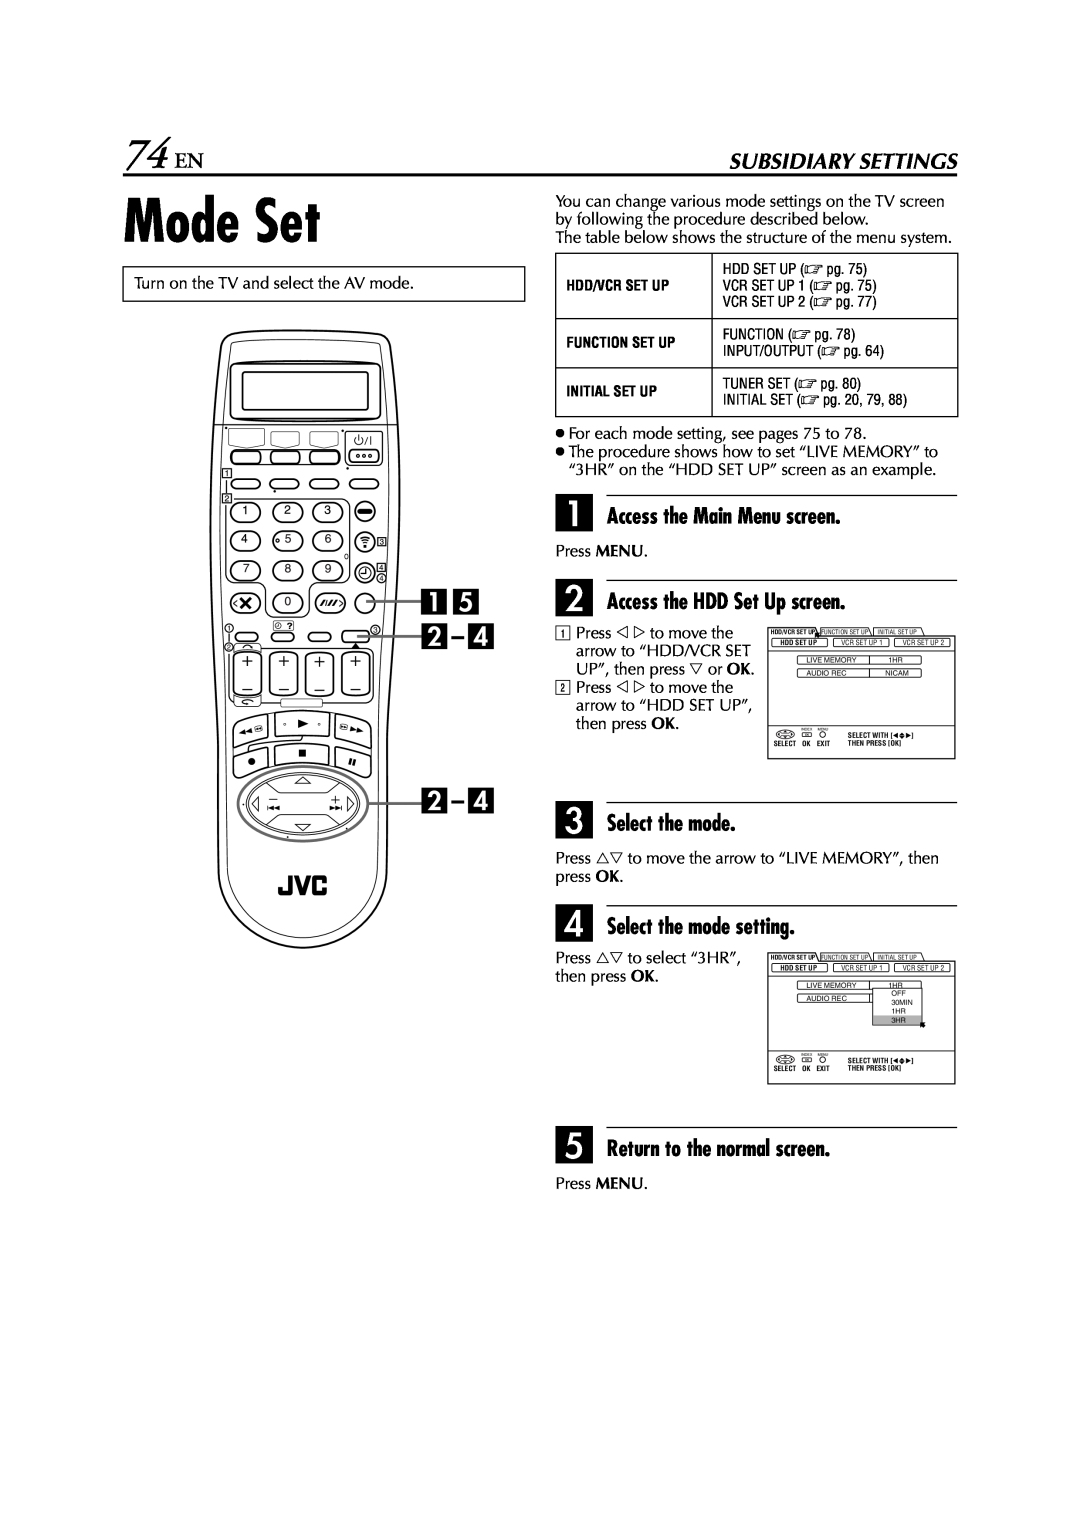 JVC HM-HDS1EU specifications Mode Set, 74 EN, B Access the HDD Set Up screen, C Select the mode, D Select the mode setting 